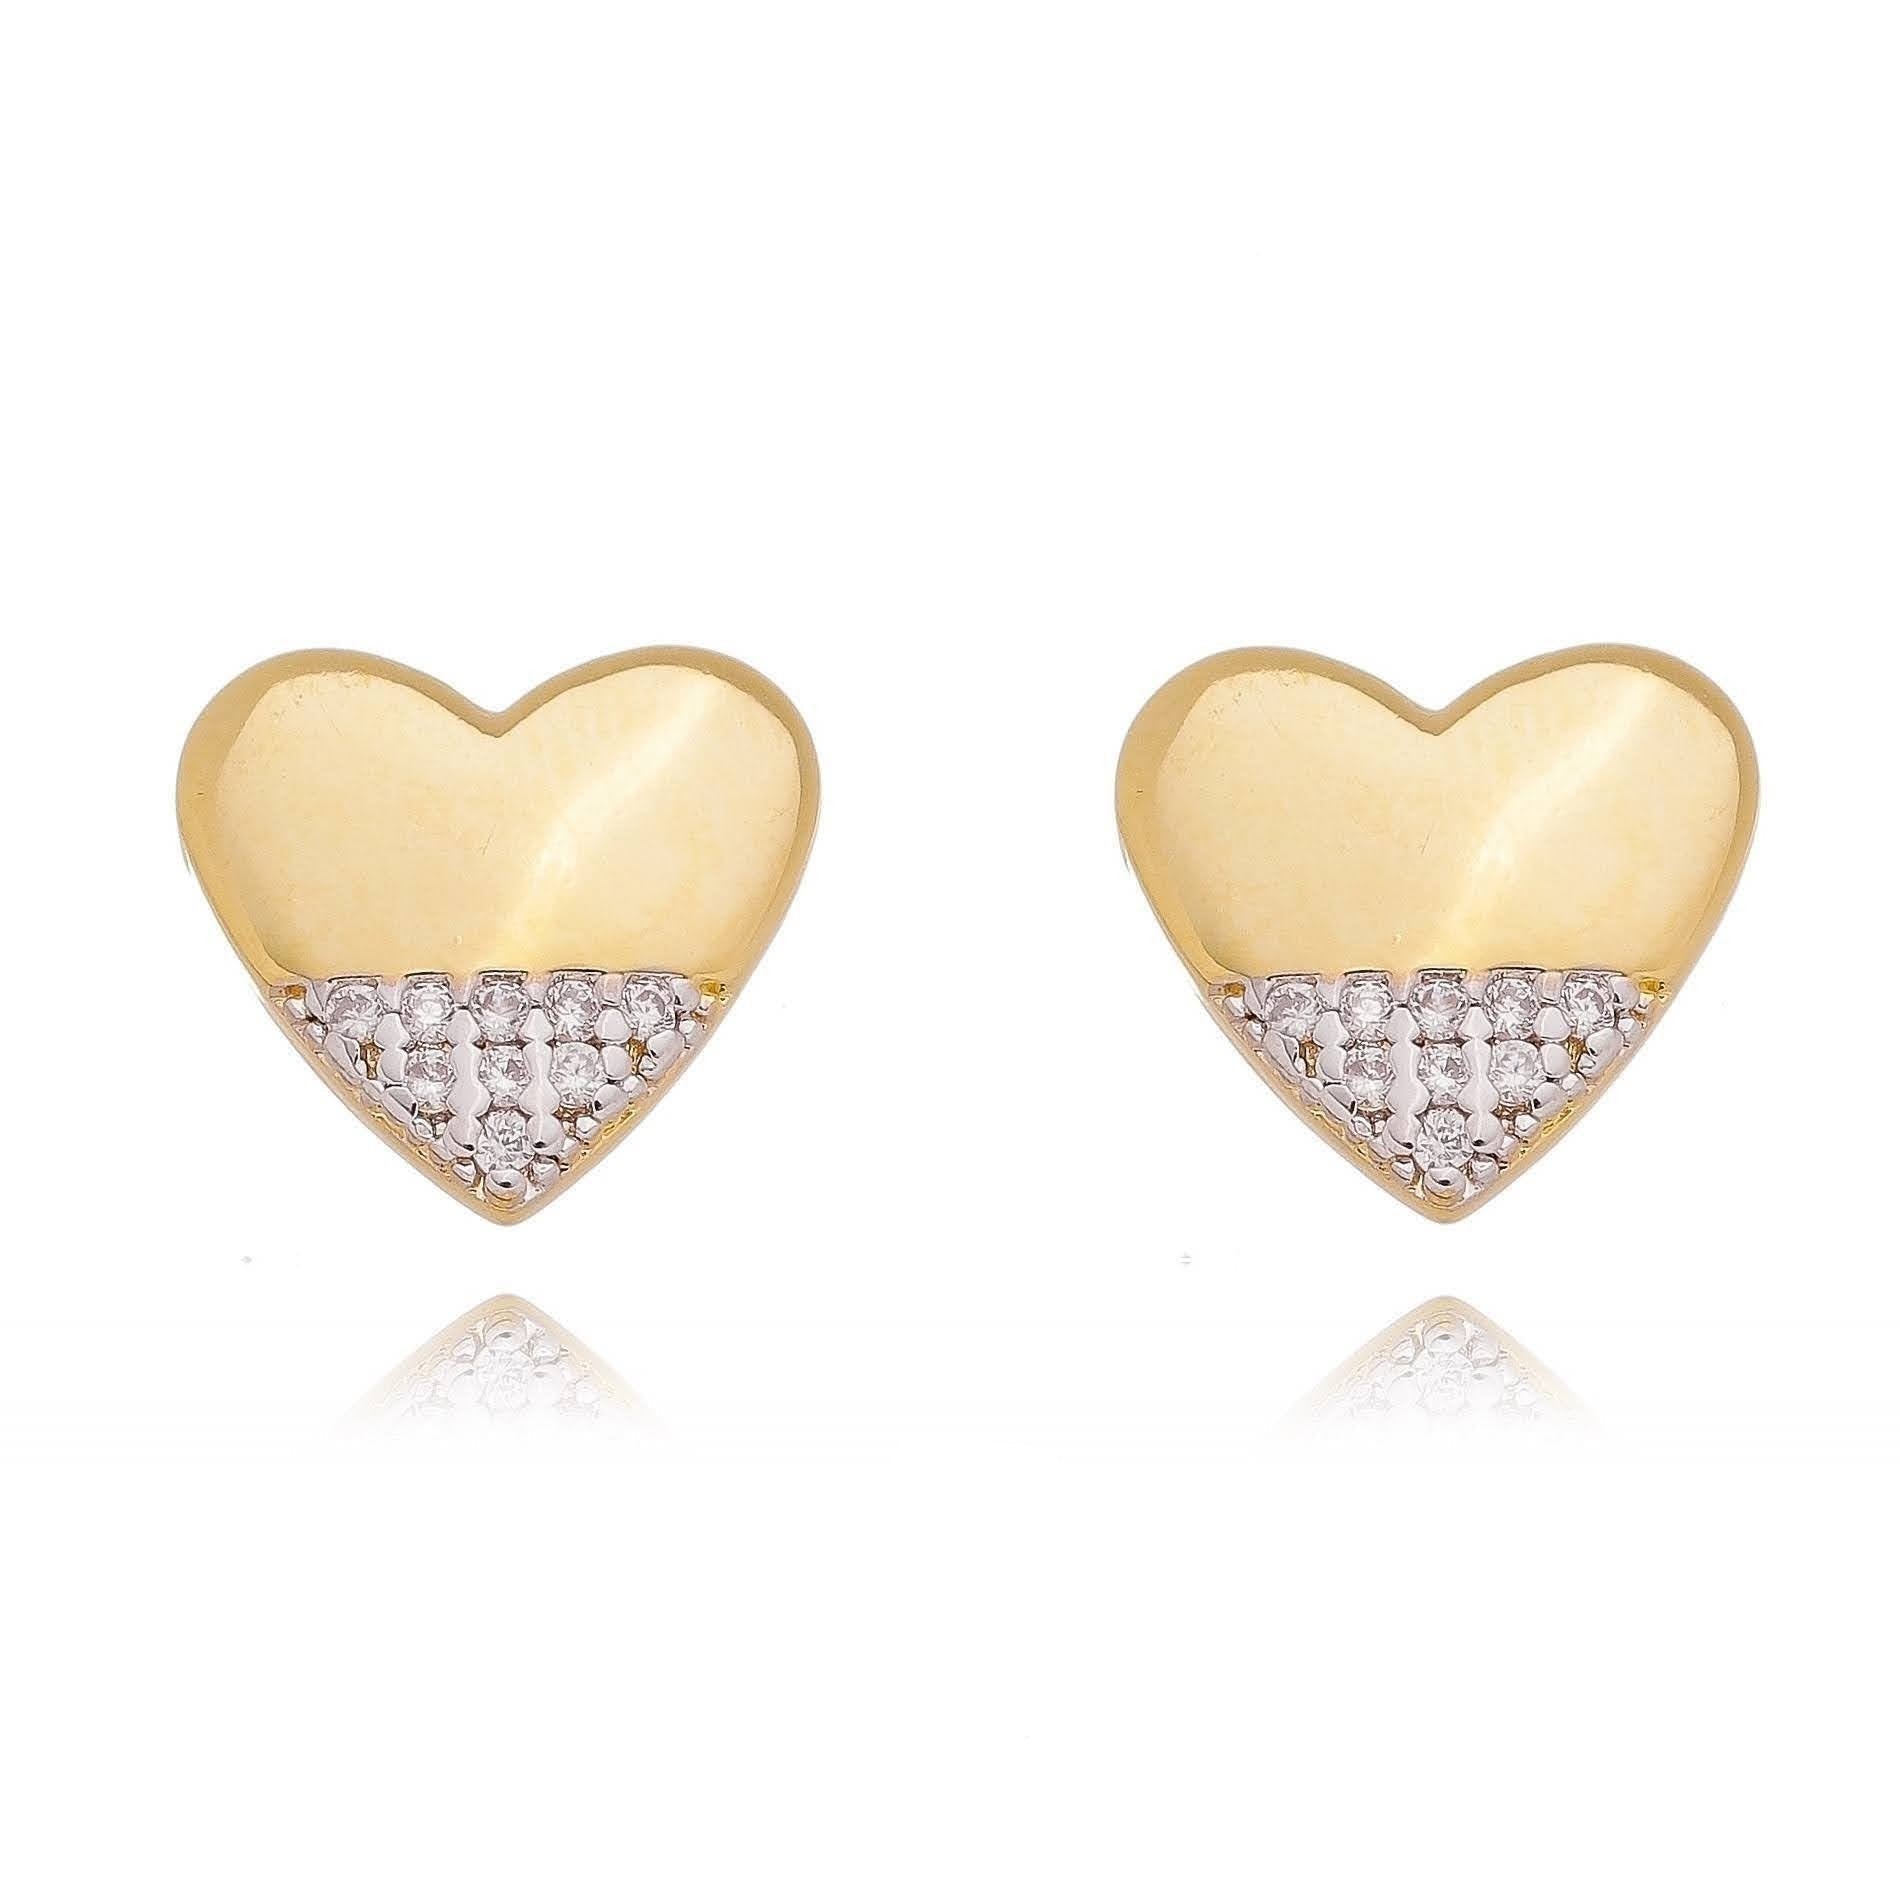 GoldFi 18k Gold Filled Heart Stud Earrings with Cubic Zirconia Stones